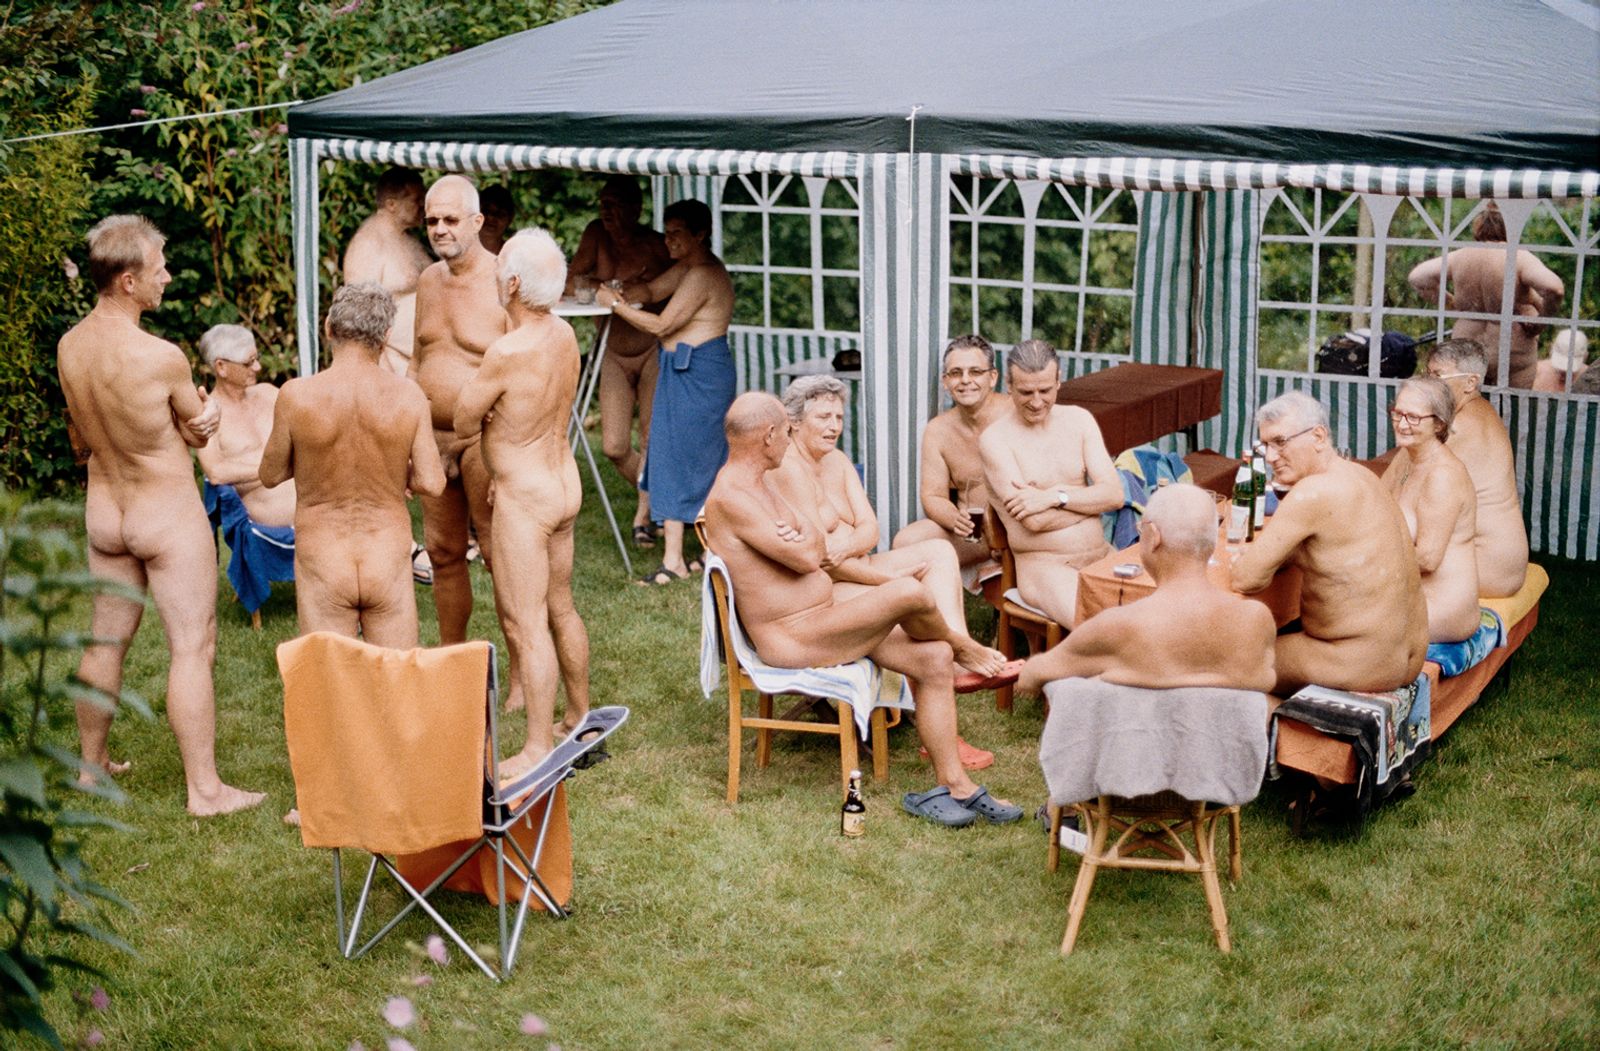 © Julia Gaes - Image from the The Naturists photography project